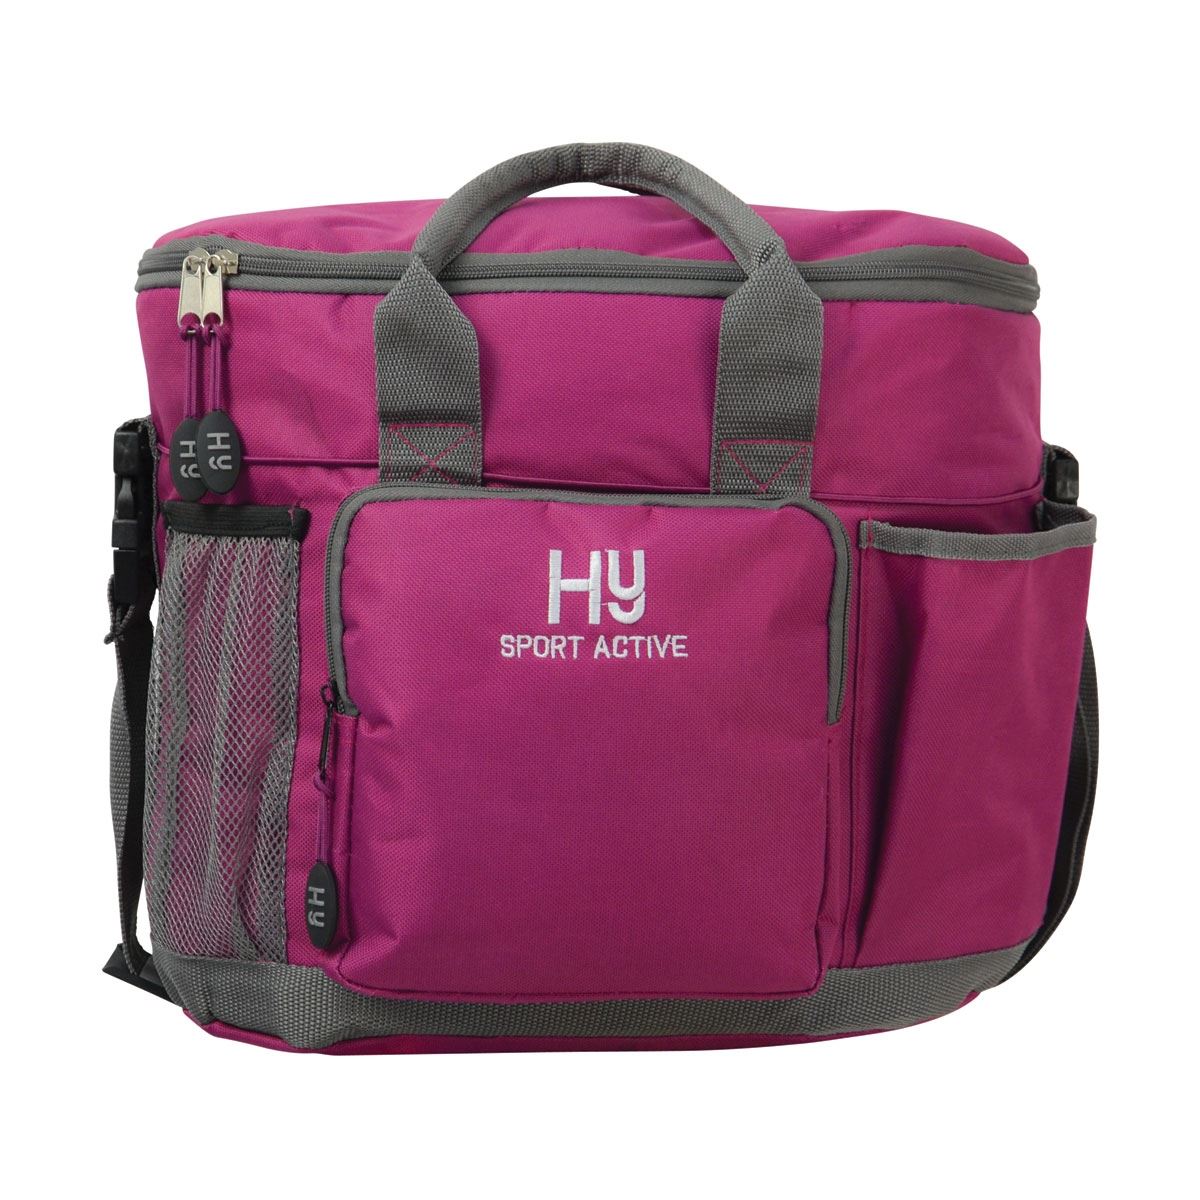 Hy Sport Active Grooming Bag - Just Horse Riders